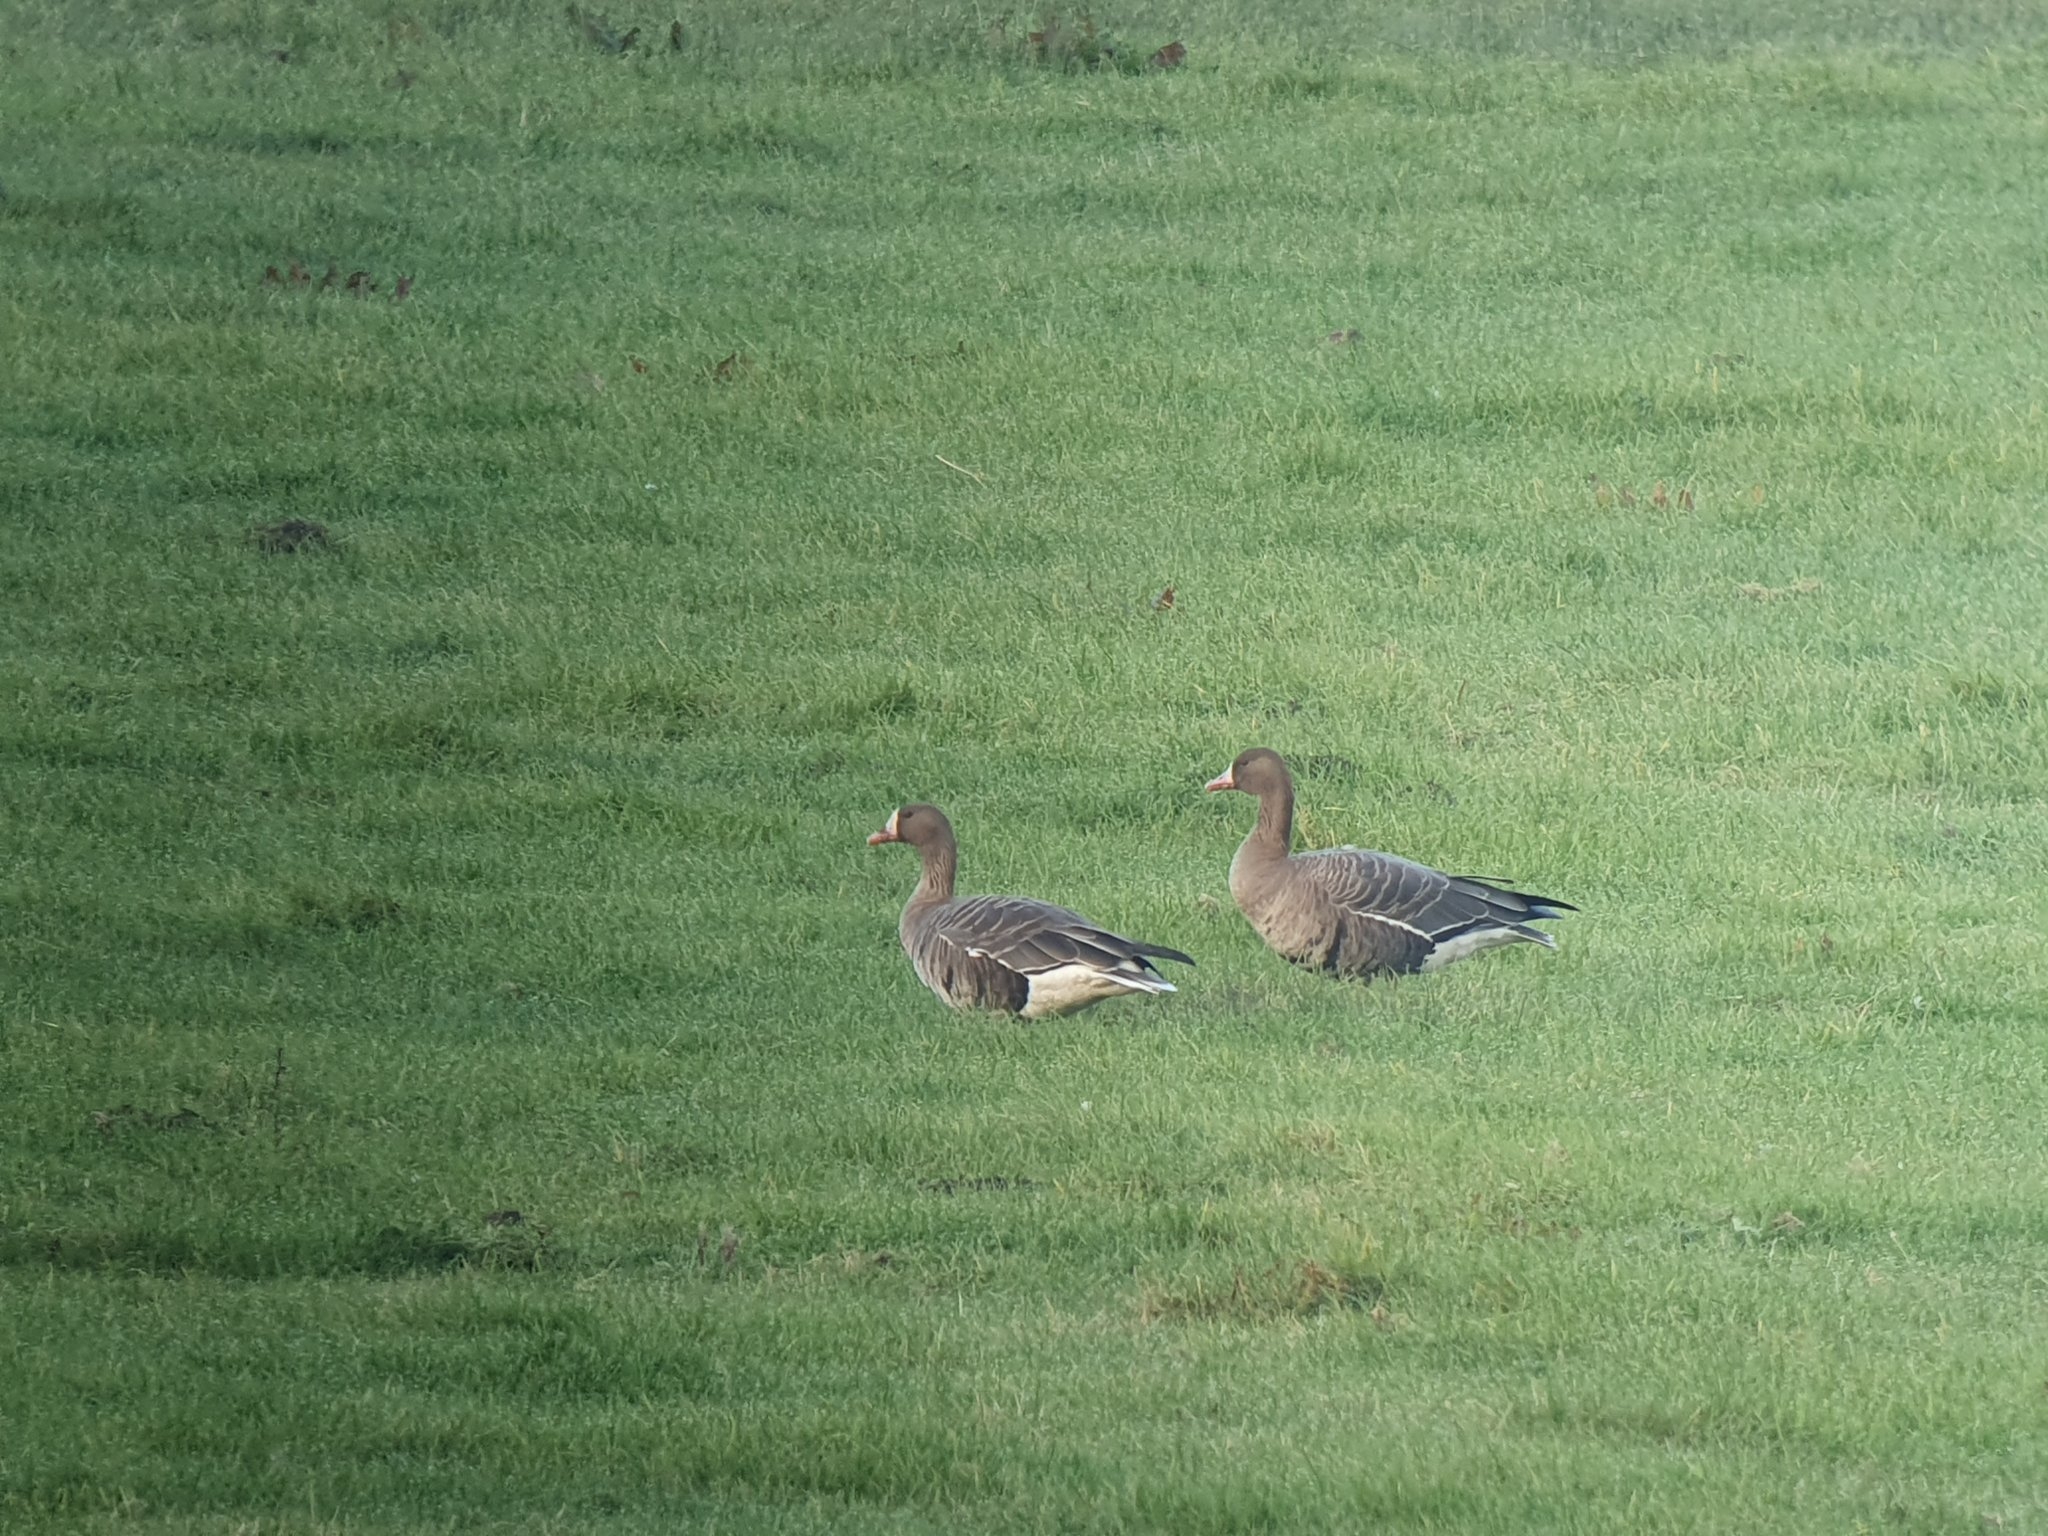 Our first White-fronts have landed